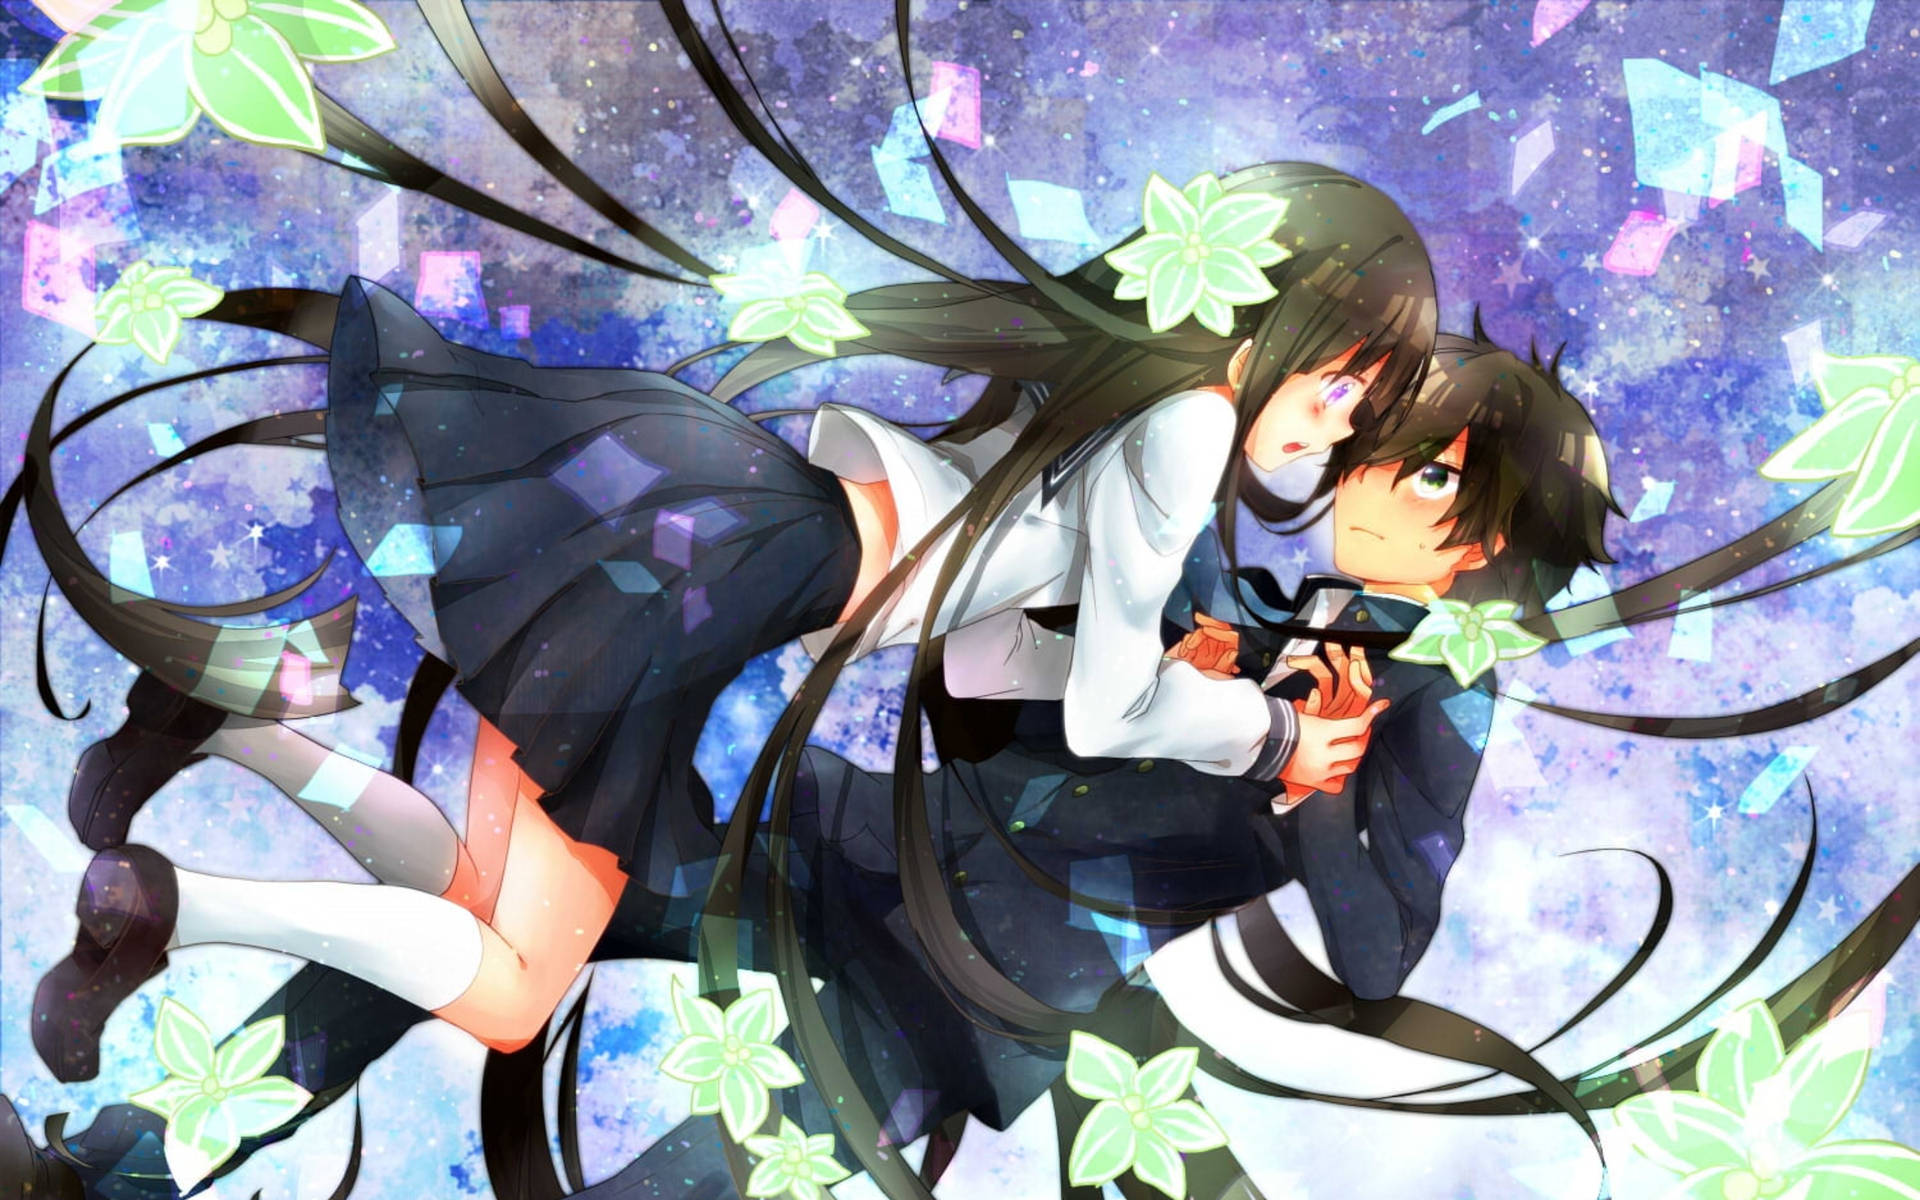 Cute Anime Couple With Green Flowers Wallpaper